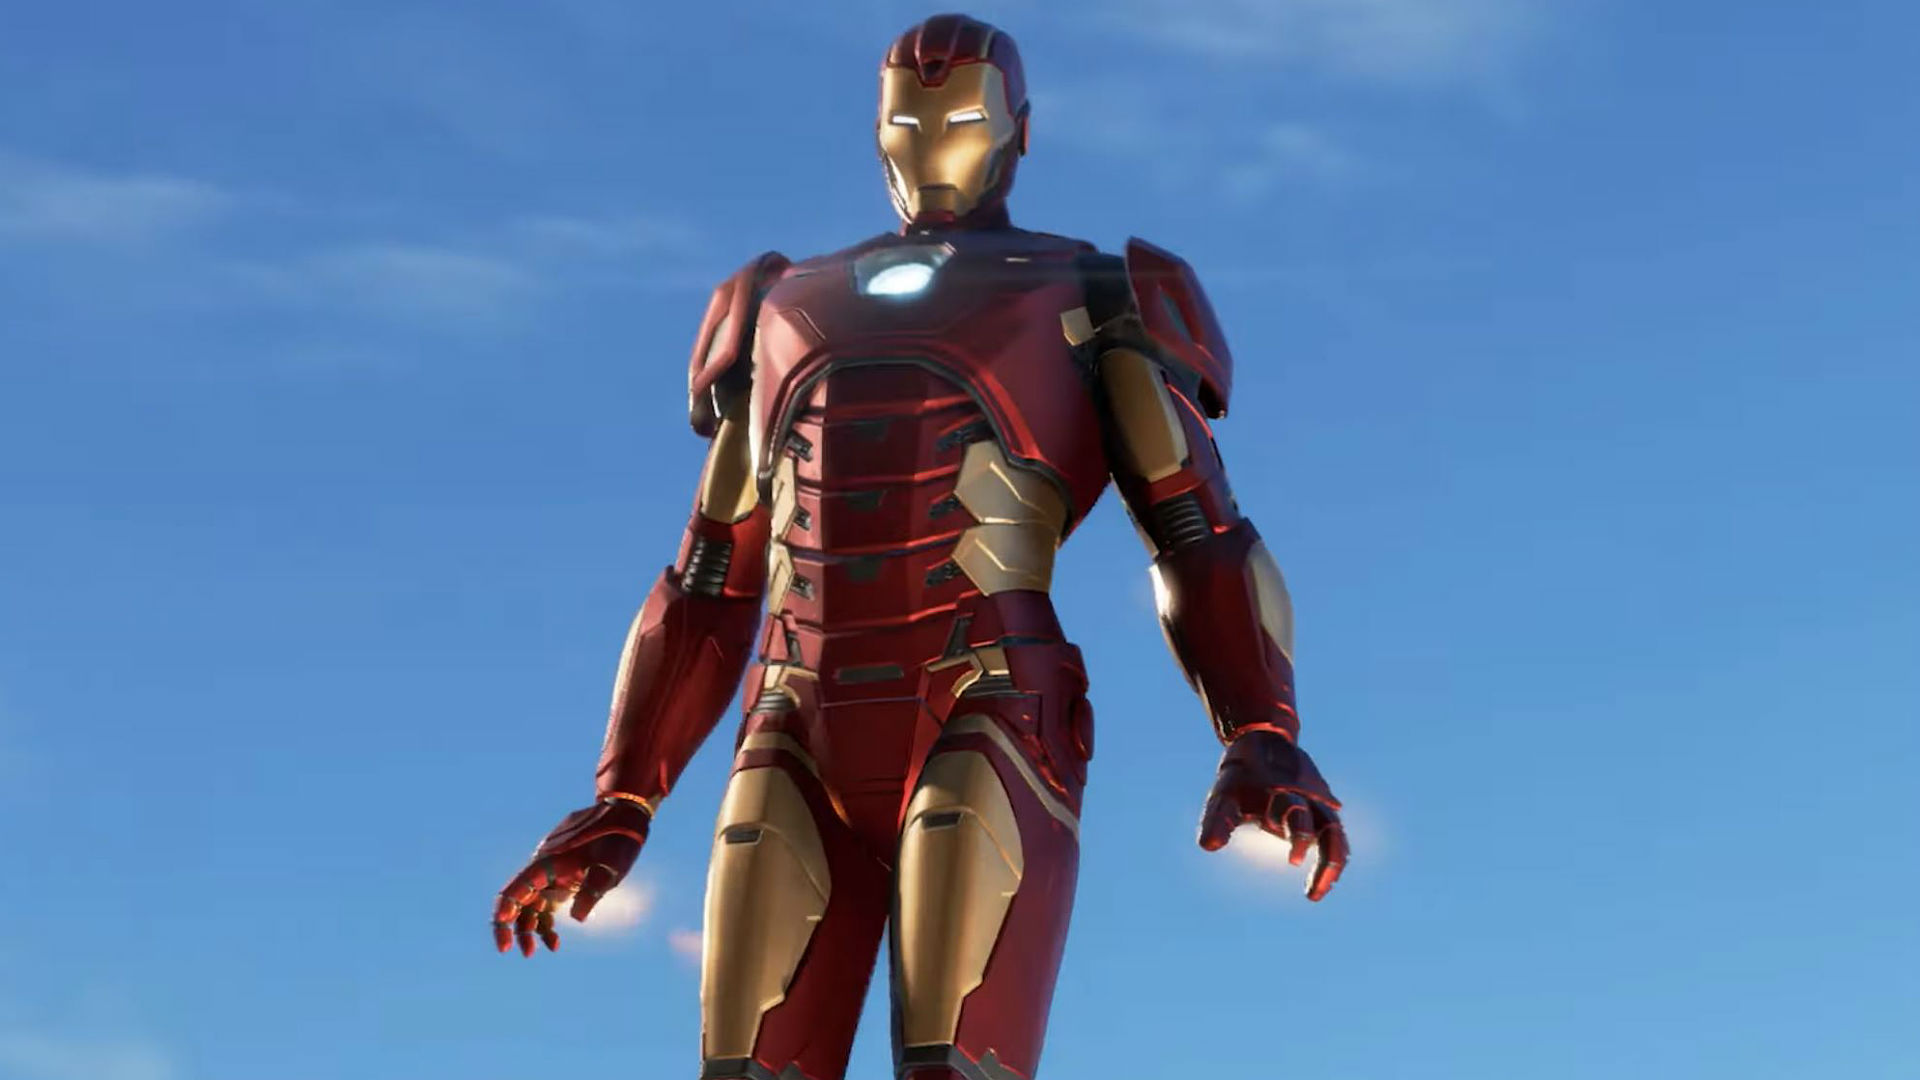 Avengers Game Iron Man skill tree all abilities detailed   PCGamesN